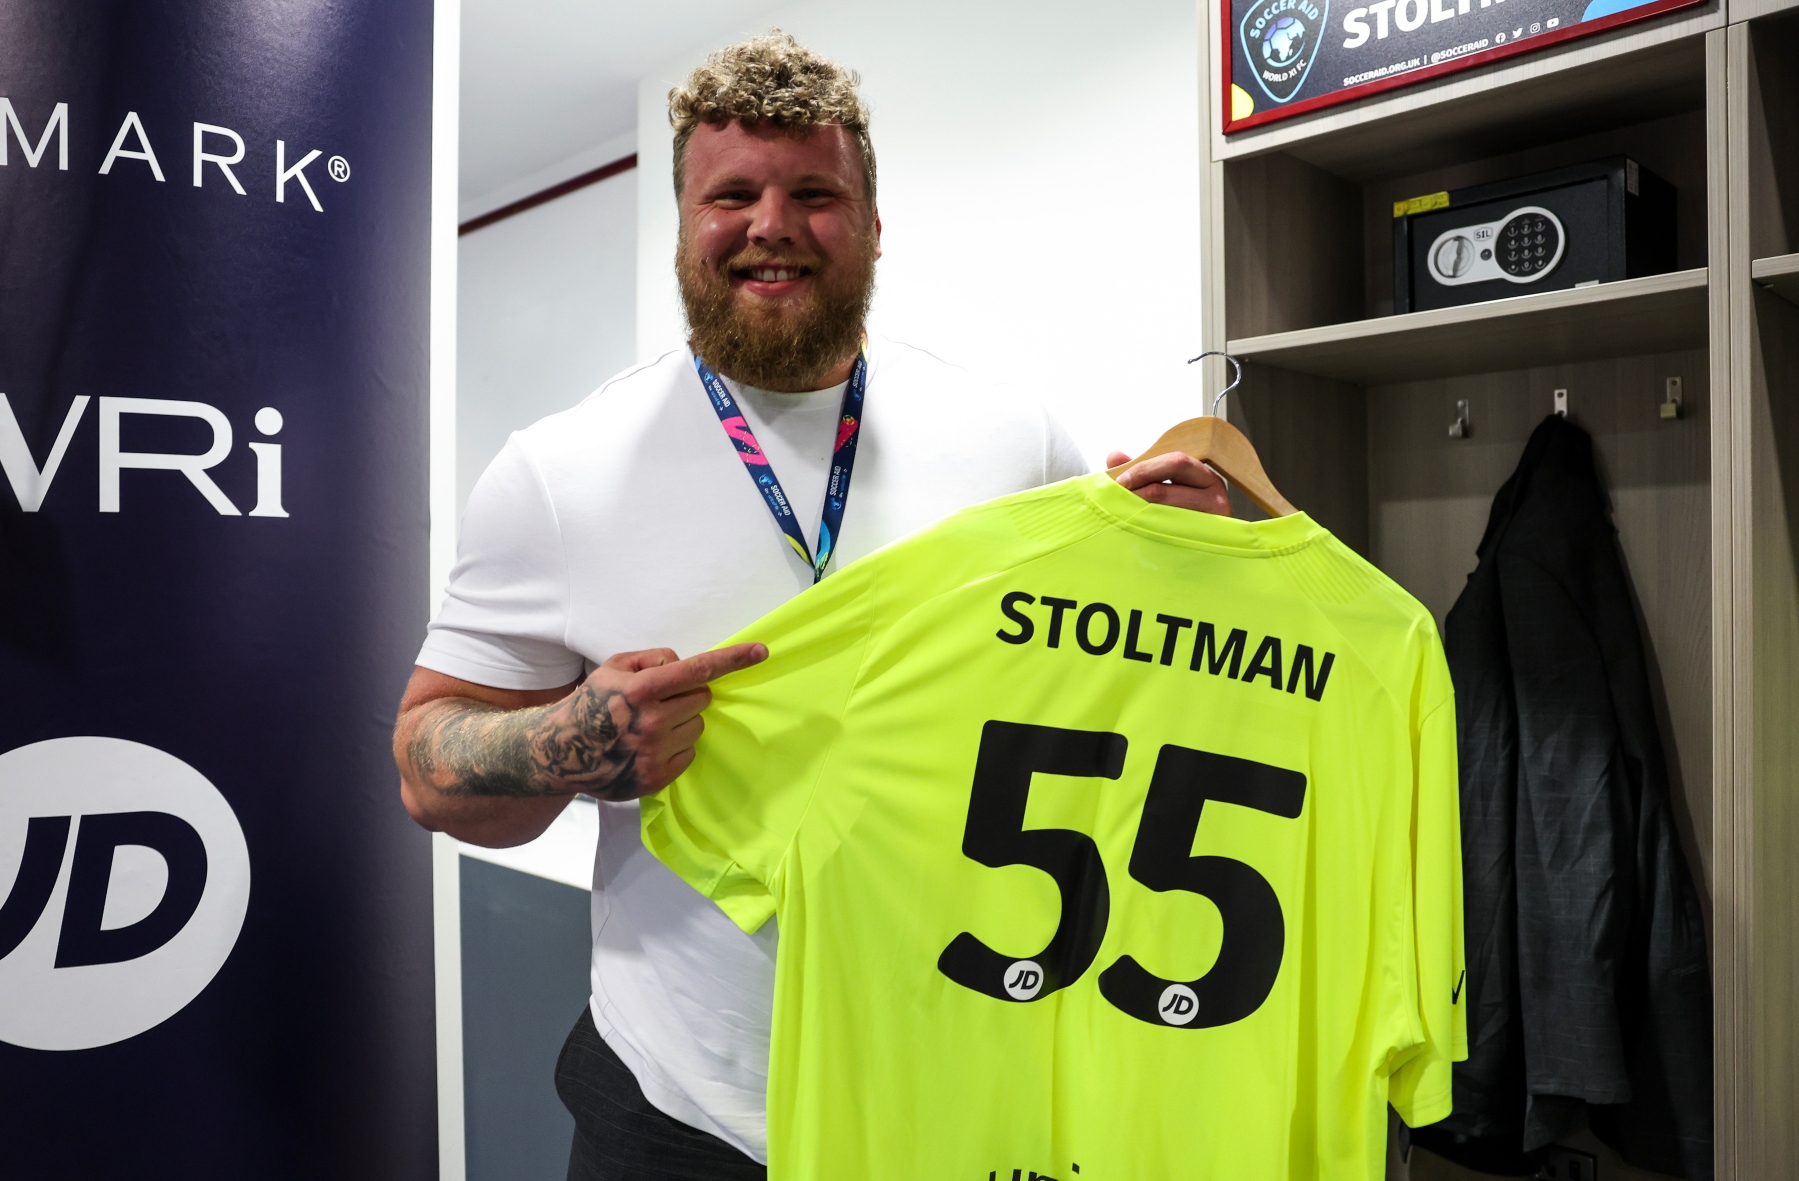 Rangers fan Stoltman played under number 55, as tribute to the Ibrox side's 55th premiership title last year. 